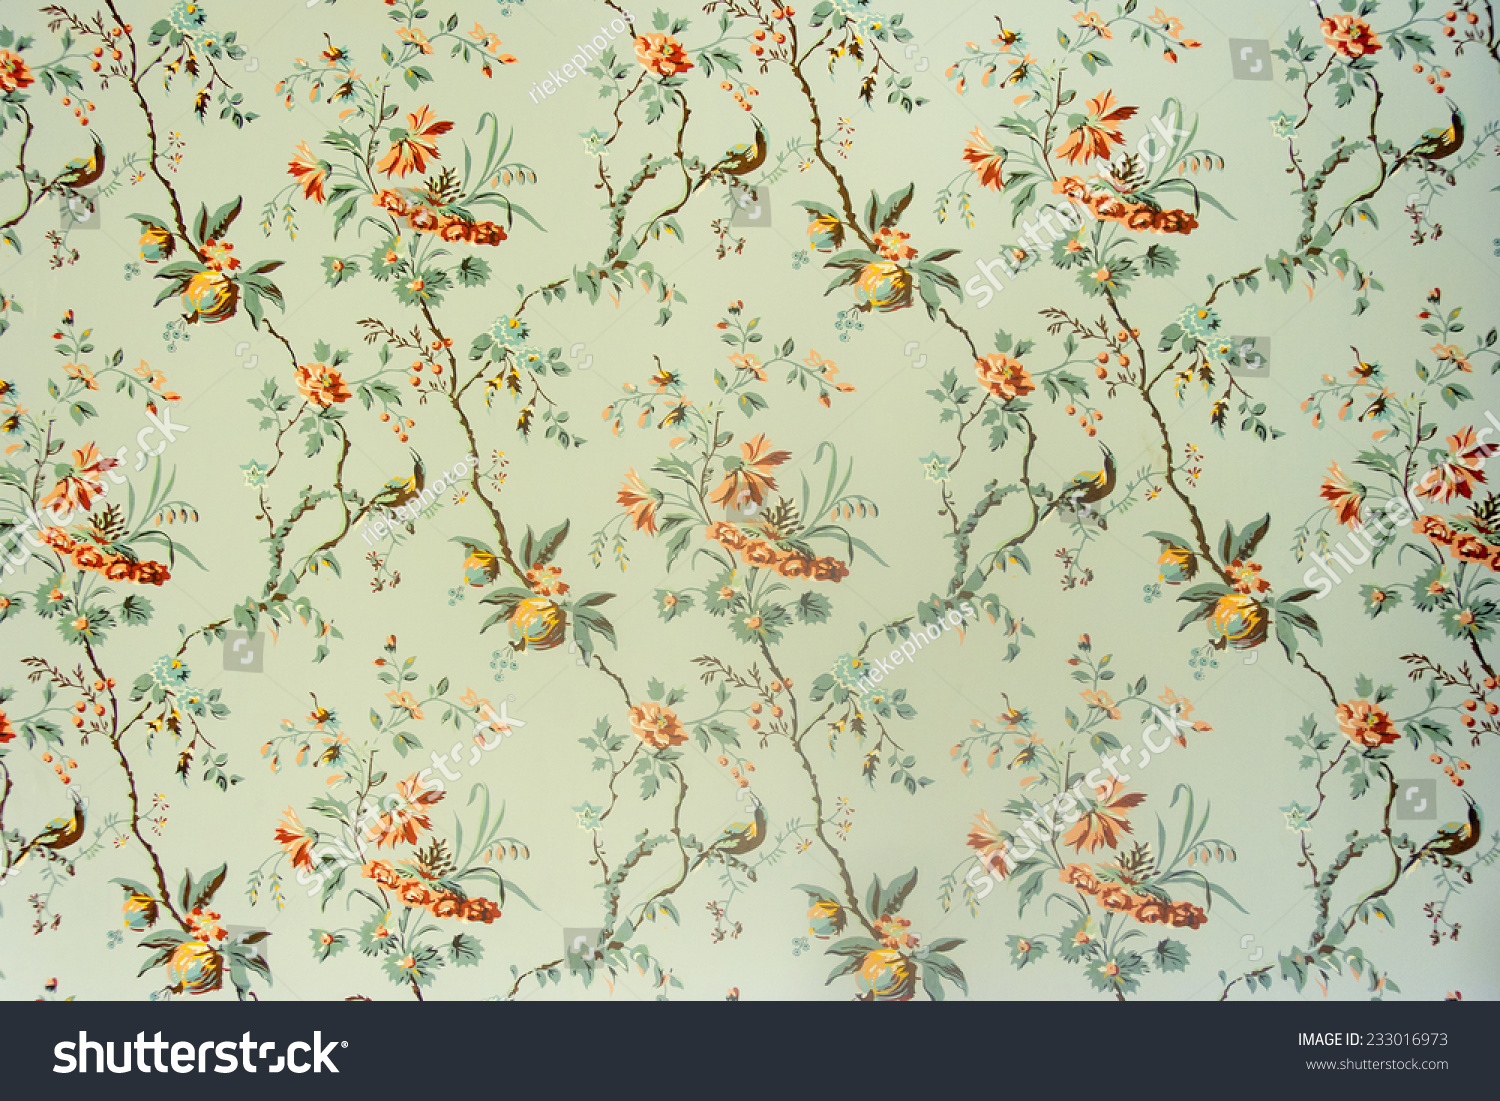 Vintage wallpaper - Floral pattern of 18th century #233016973